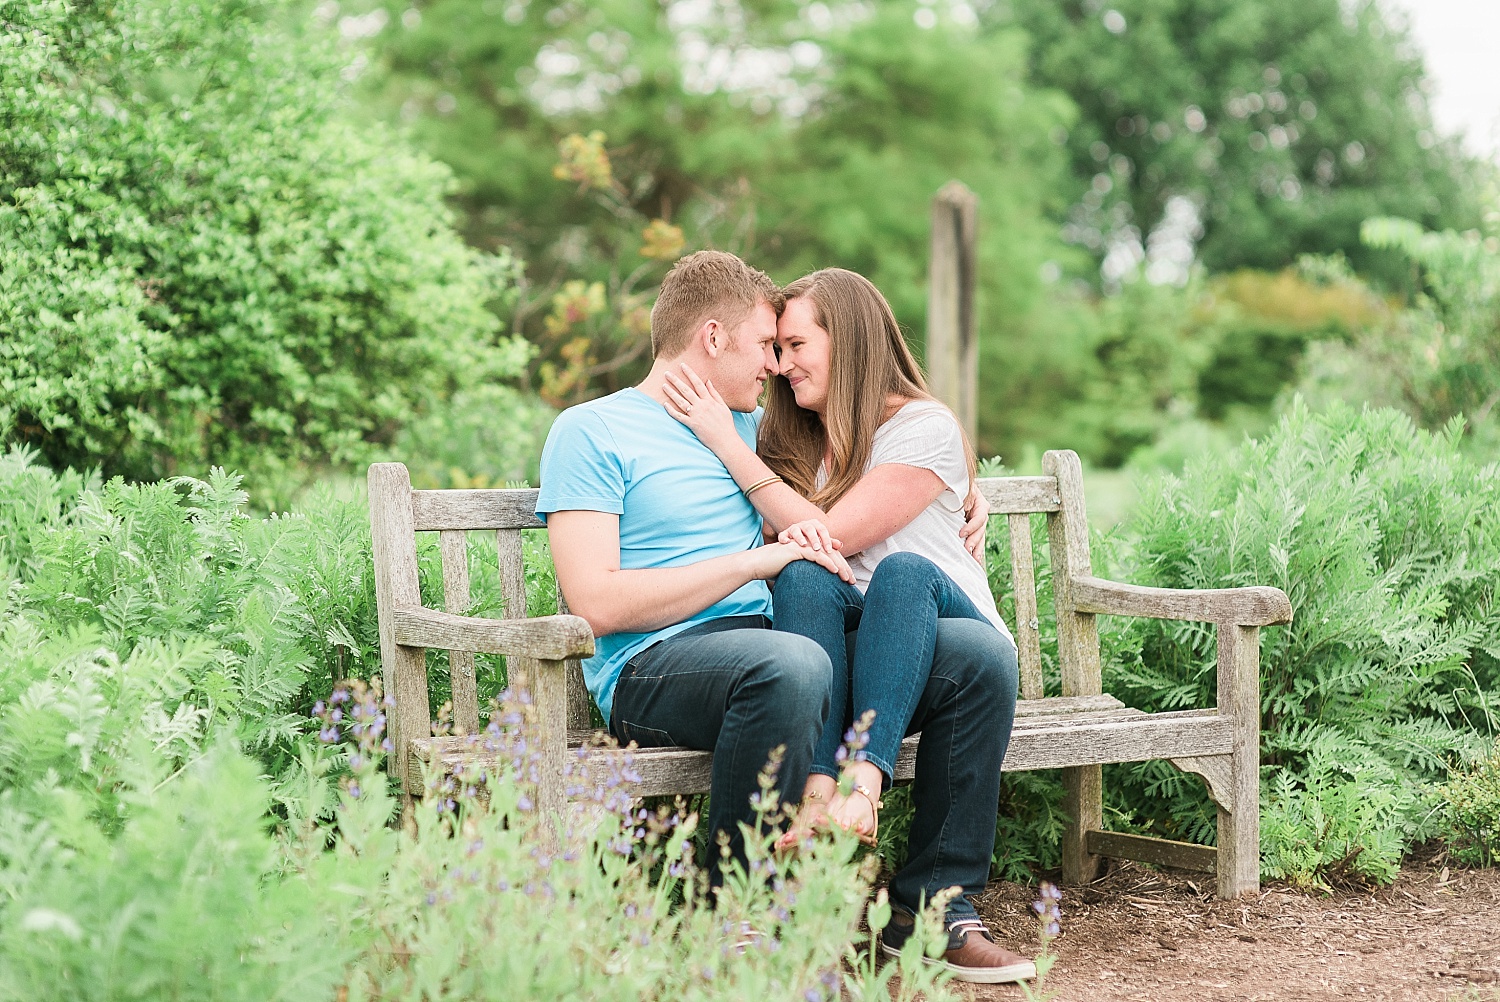 Light And Airy Engagement Session At The Uk Arboretum Taylor And Beau Keith And Melissa Photography